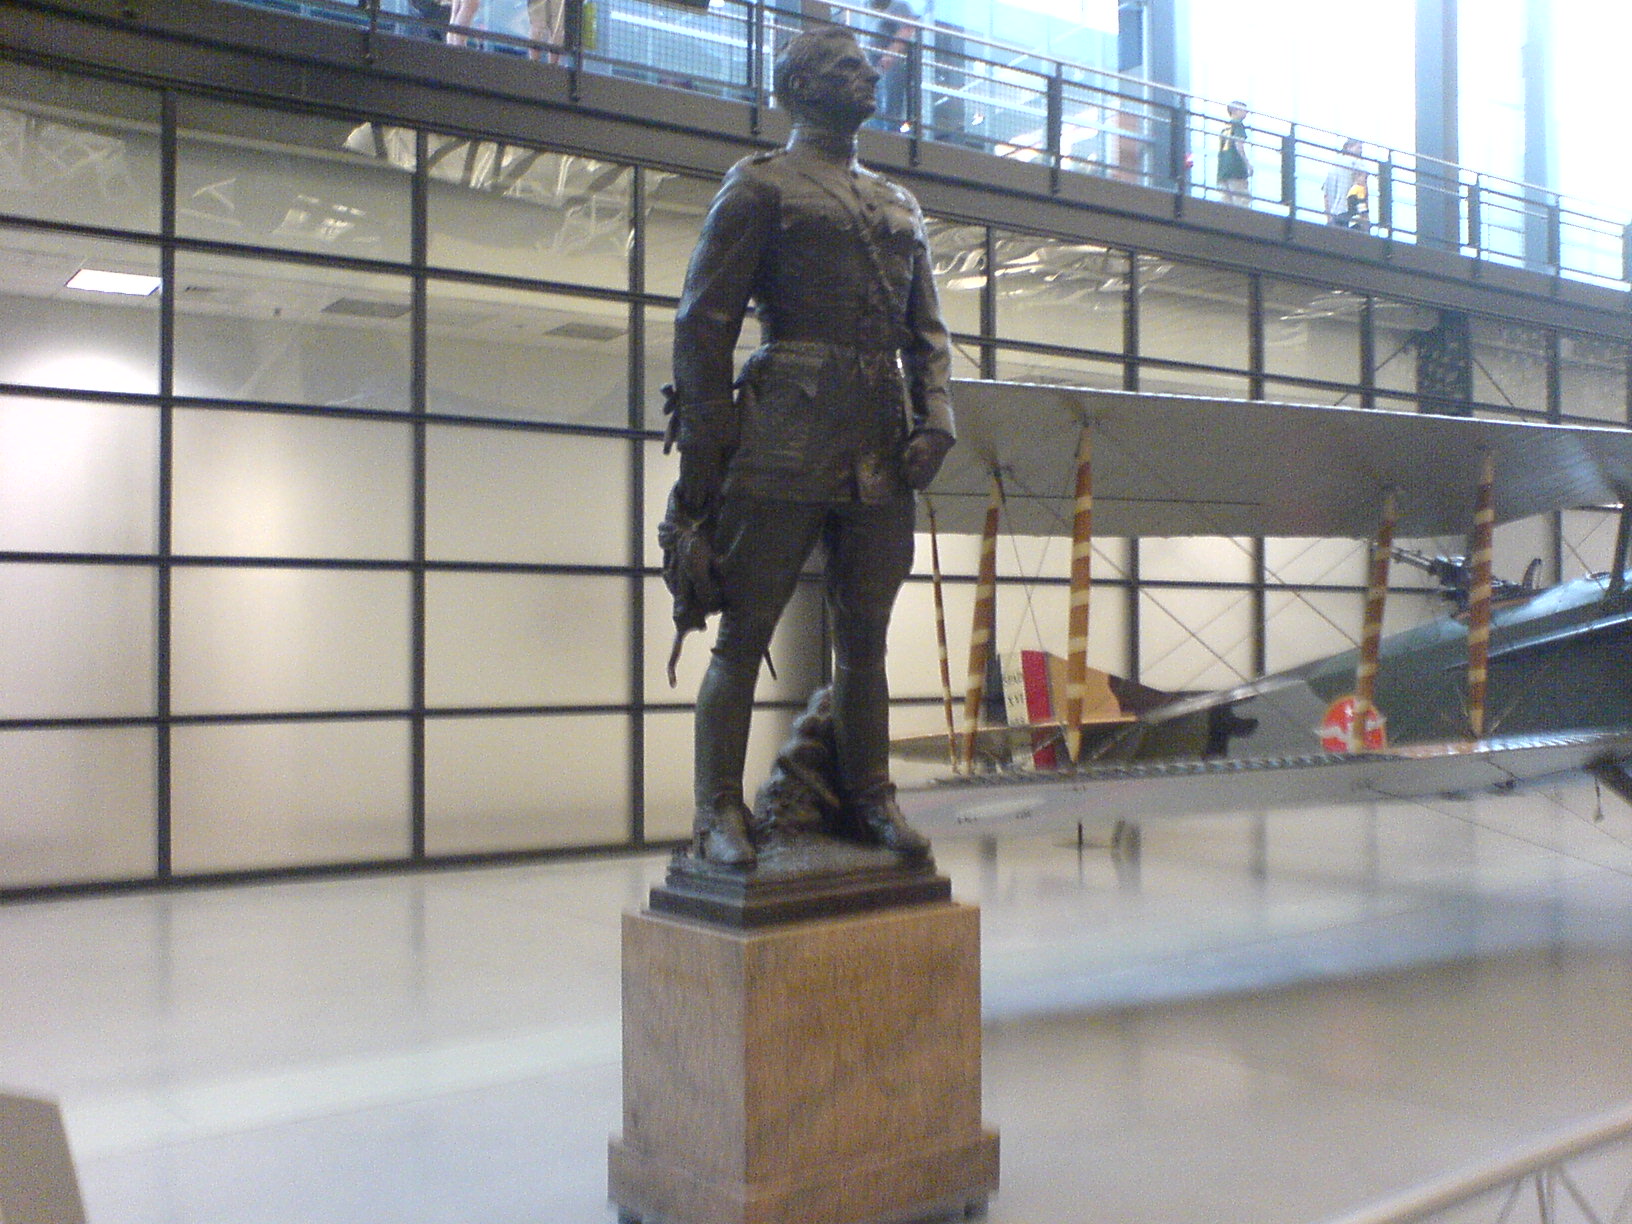 a bronze sculpture in the middle of an indoor museum